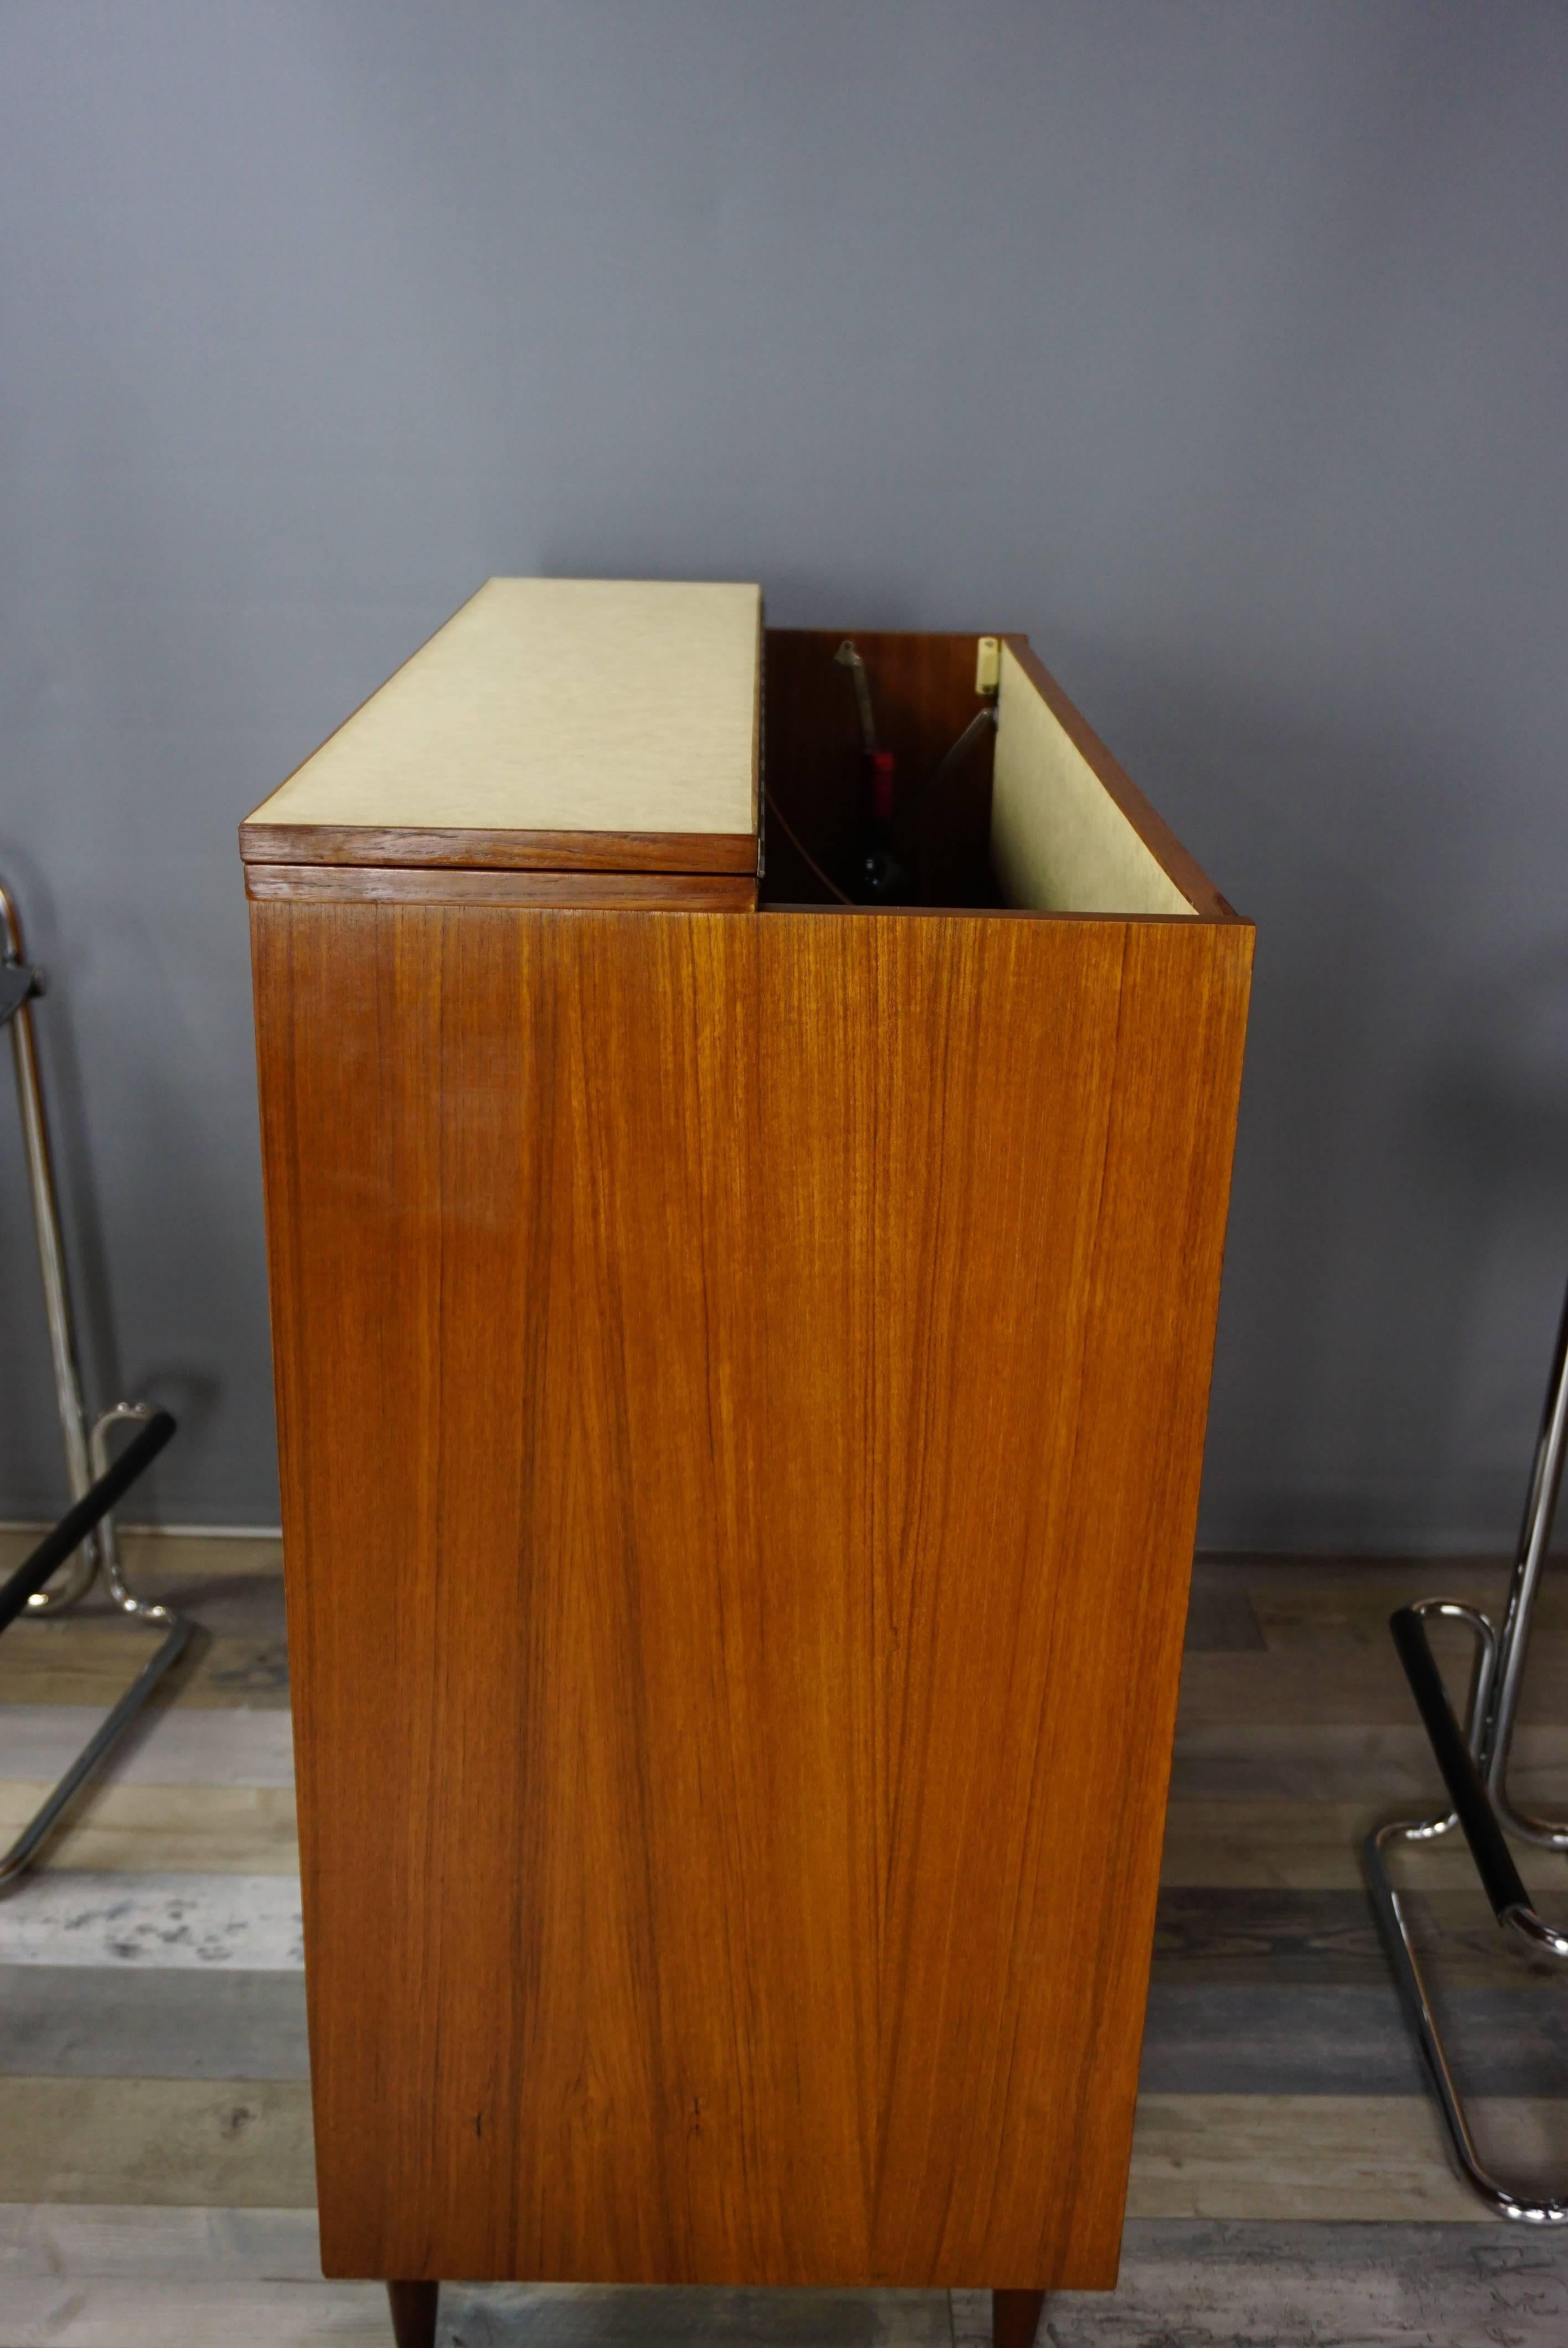 French Ceraùic and Wooden Teak Bar Cabinet from the 1960s